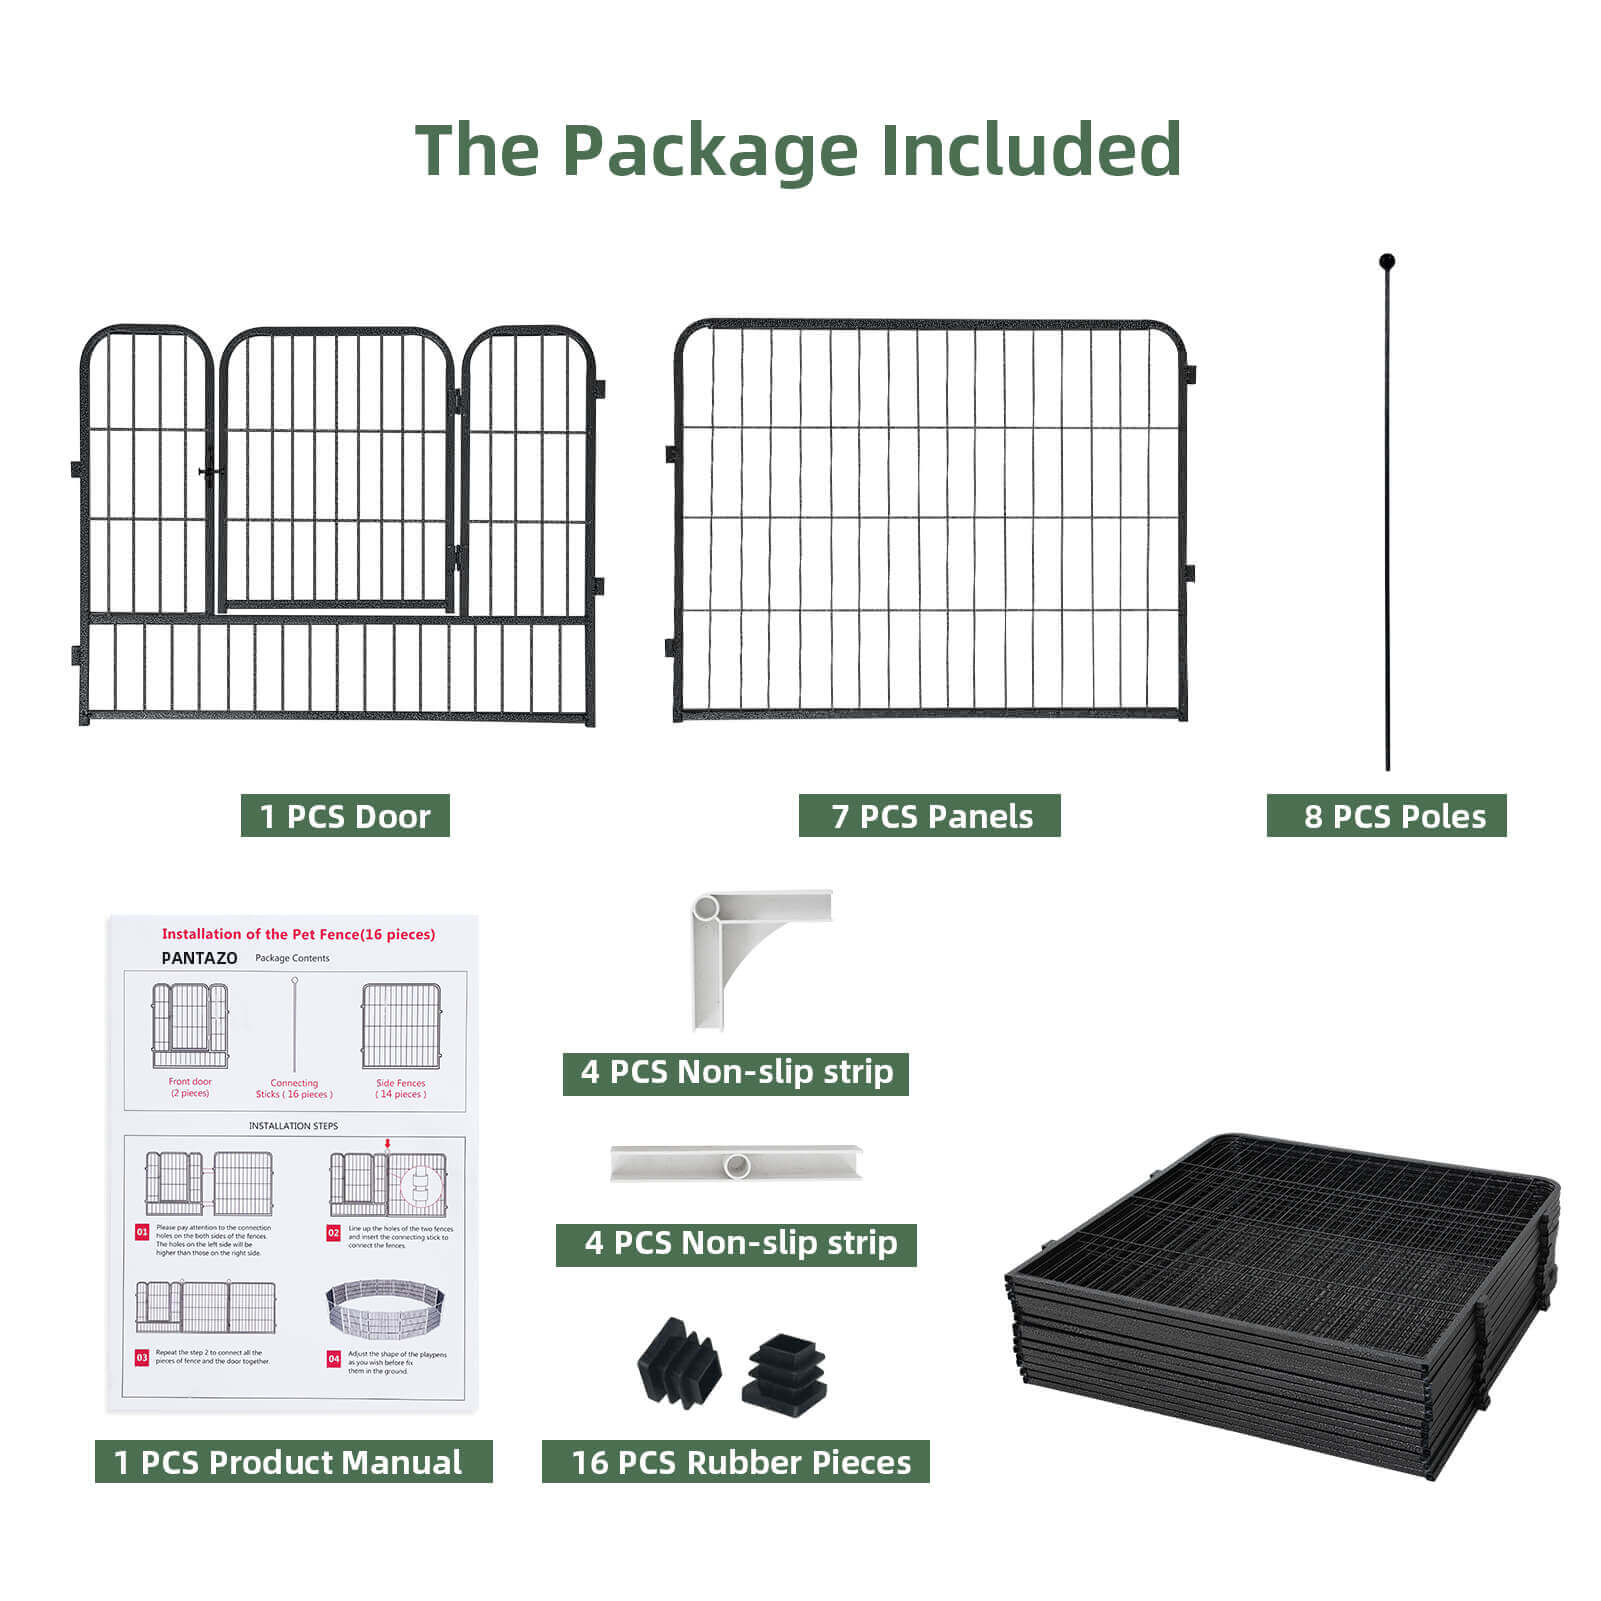 The package included display of Elecwish High-Security Pet Fences